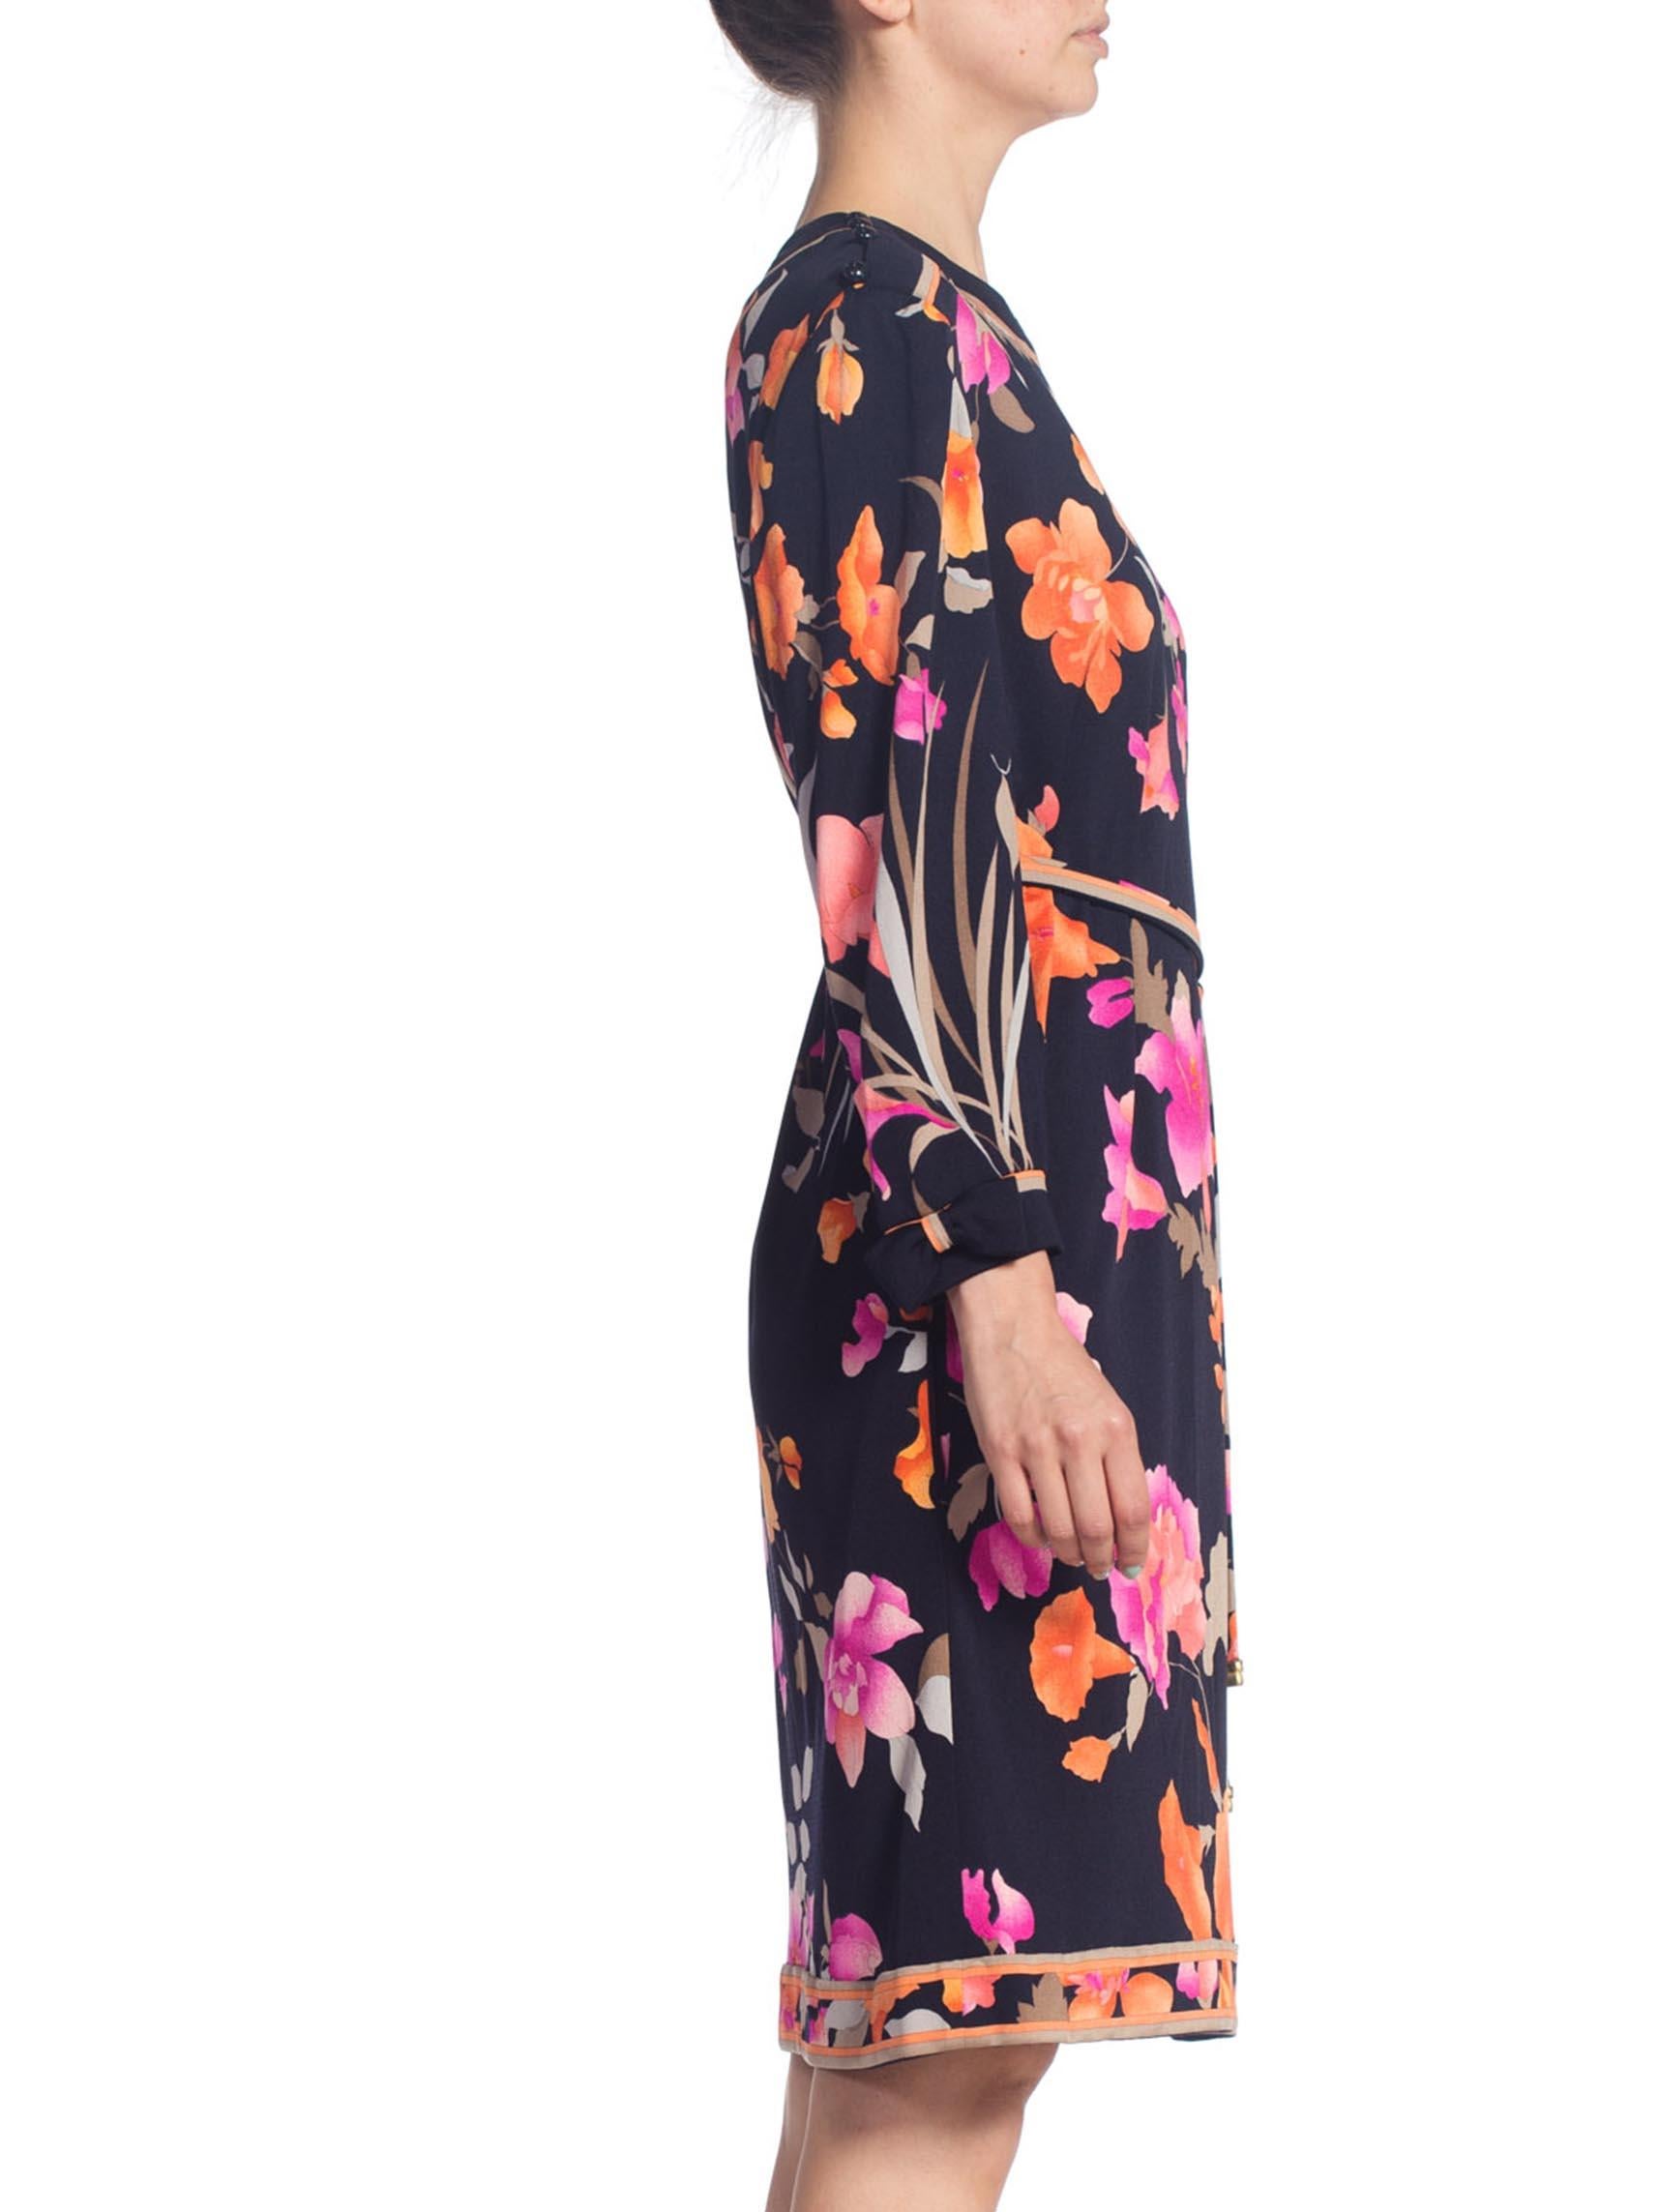 1980S LEONARD Black & Pink Silk Floral Printed Dress With Sleeves Belt In Excellent Condition For Sale In New York, NY